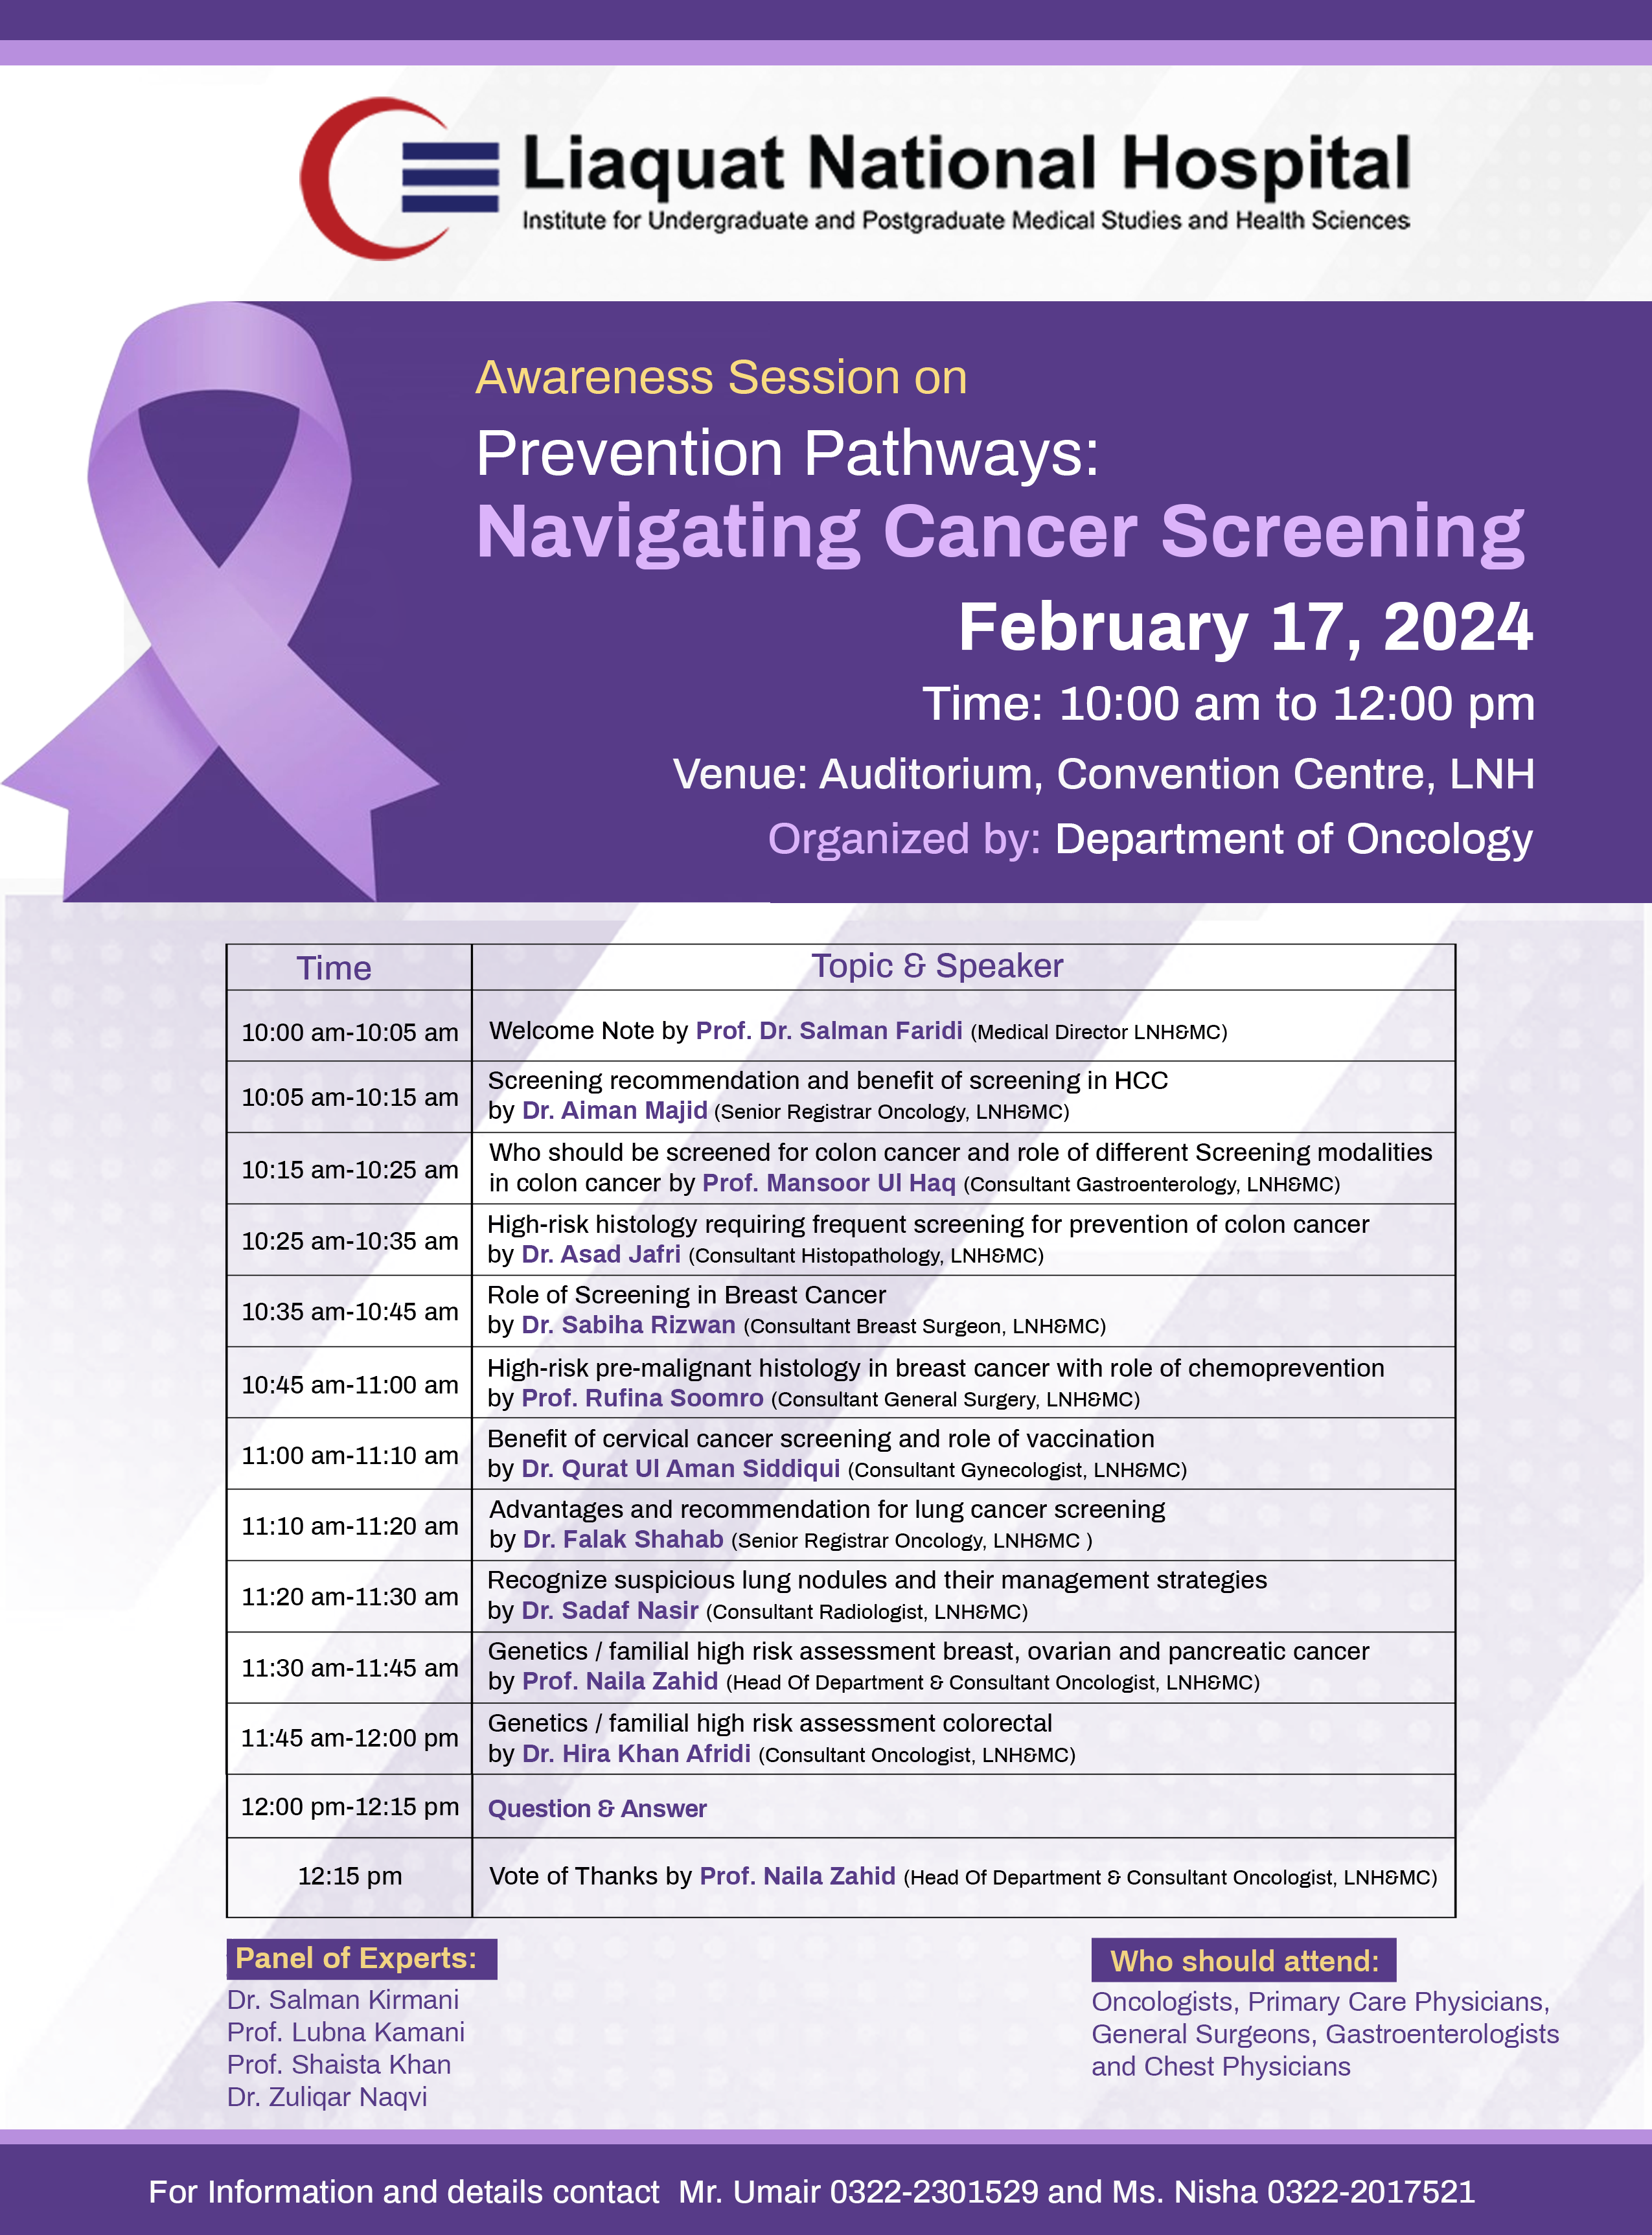 Awareness Session on Prevention Pathways: Navigating Cancer Screening